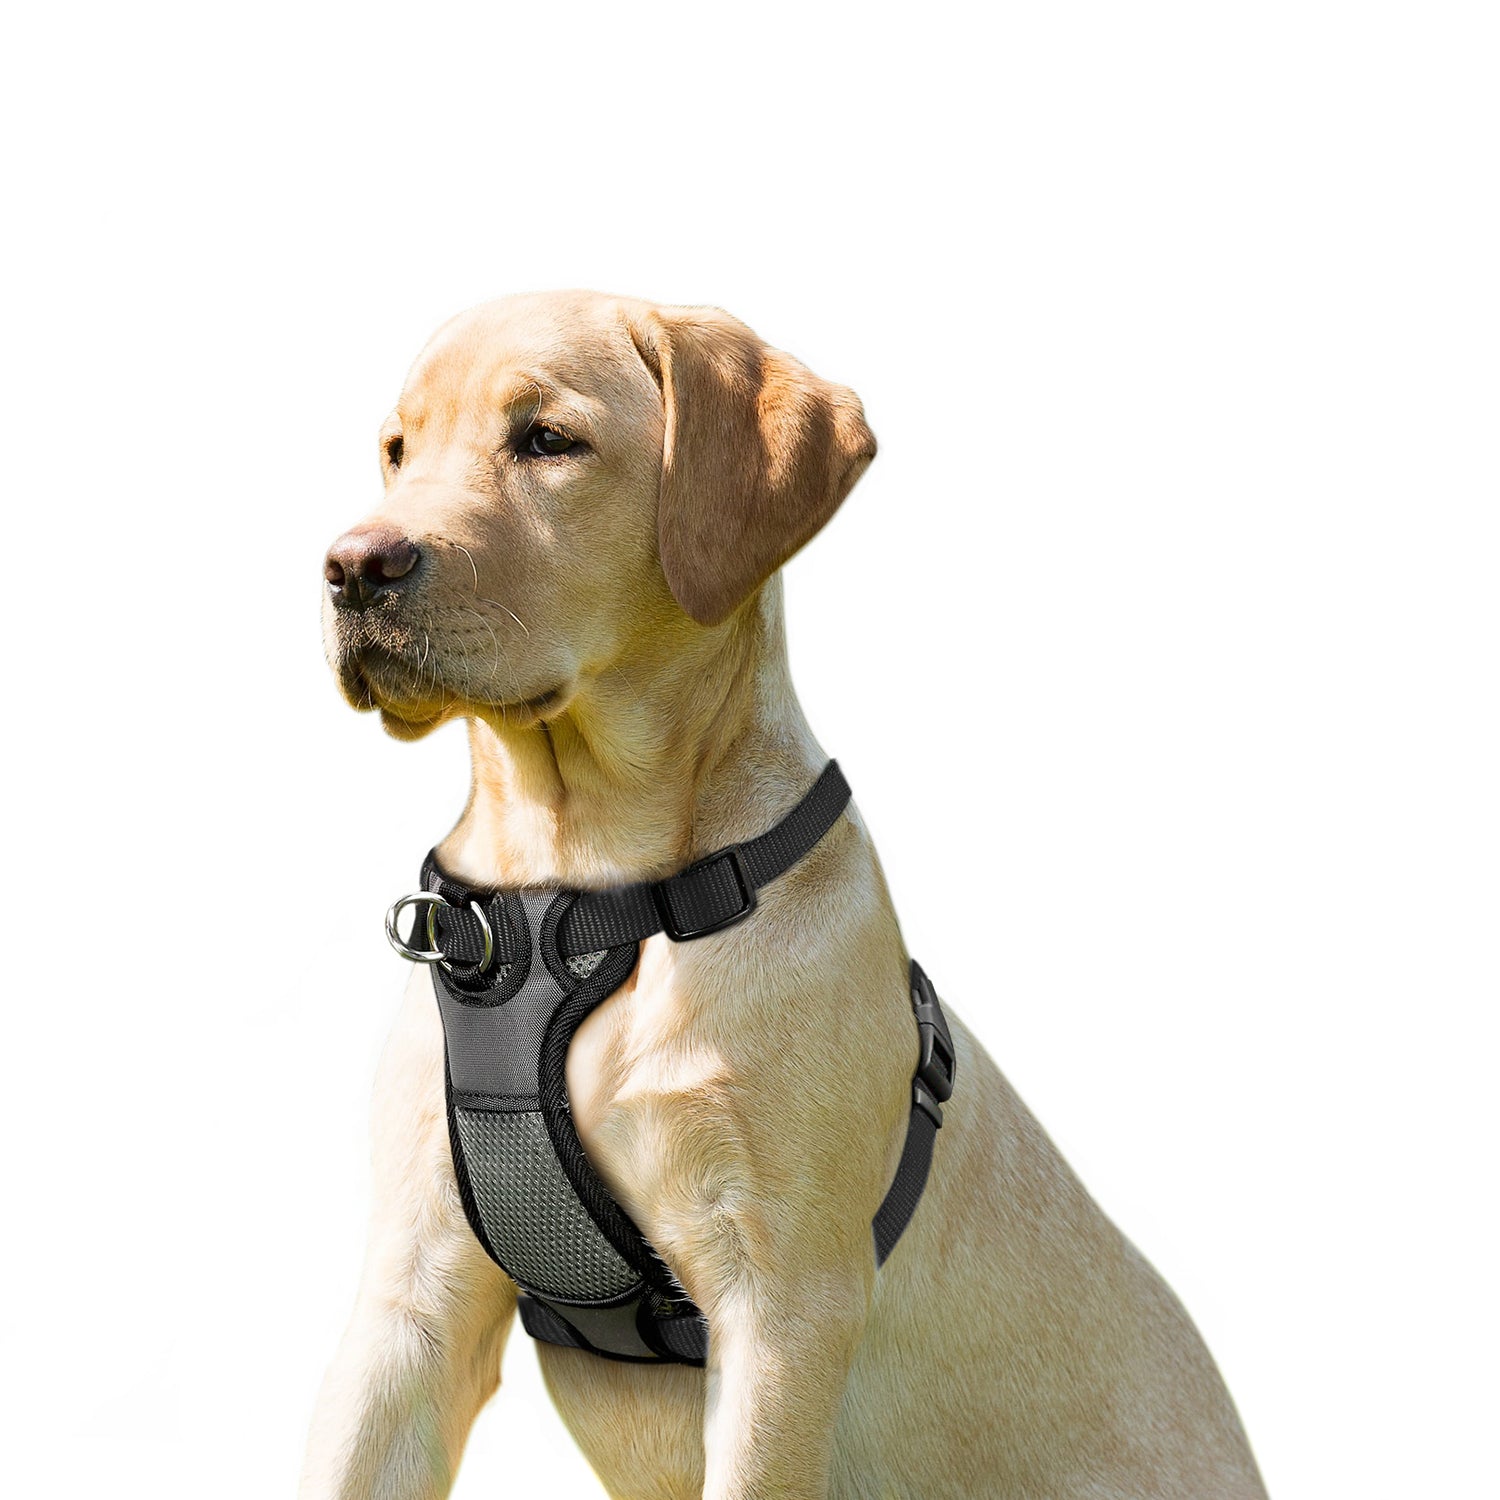 JESPET Dog Harness No Pull with Adjustable Straps for Training, Black